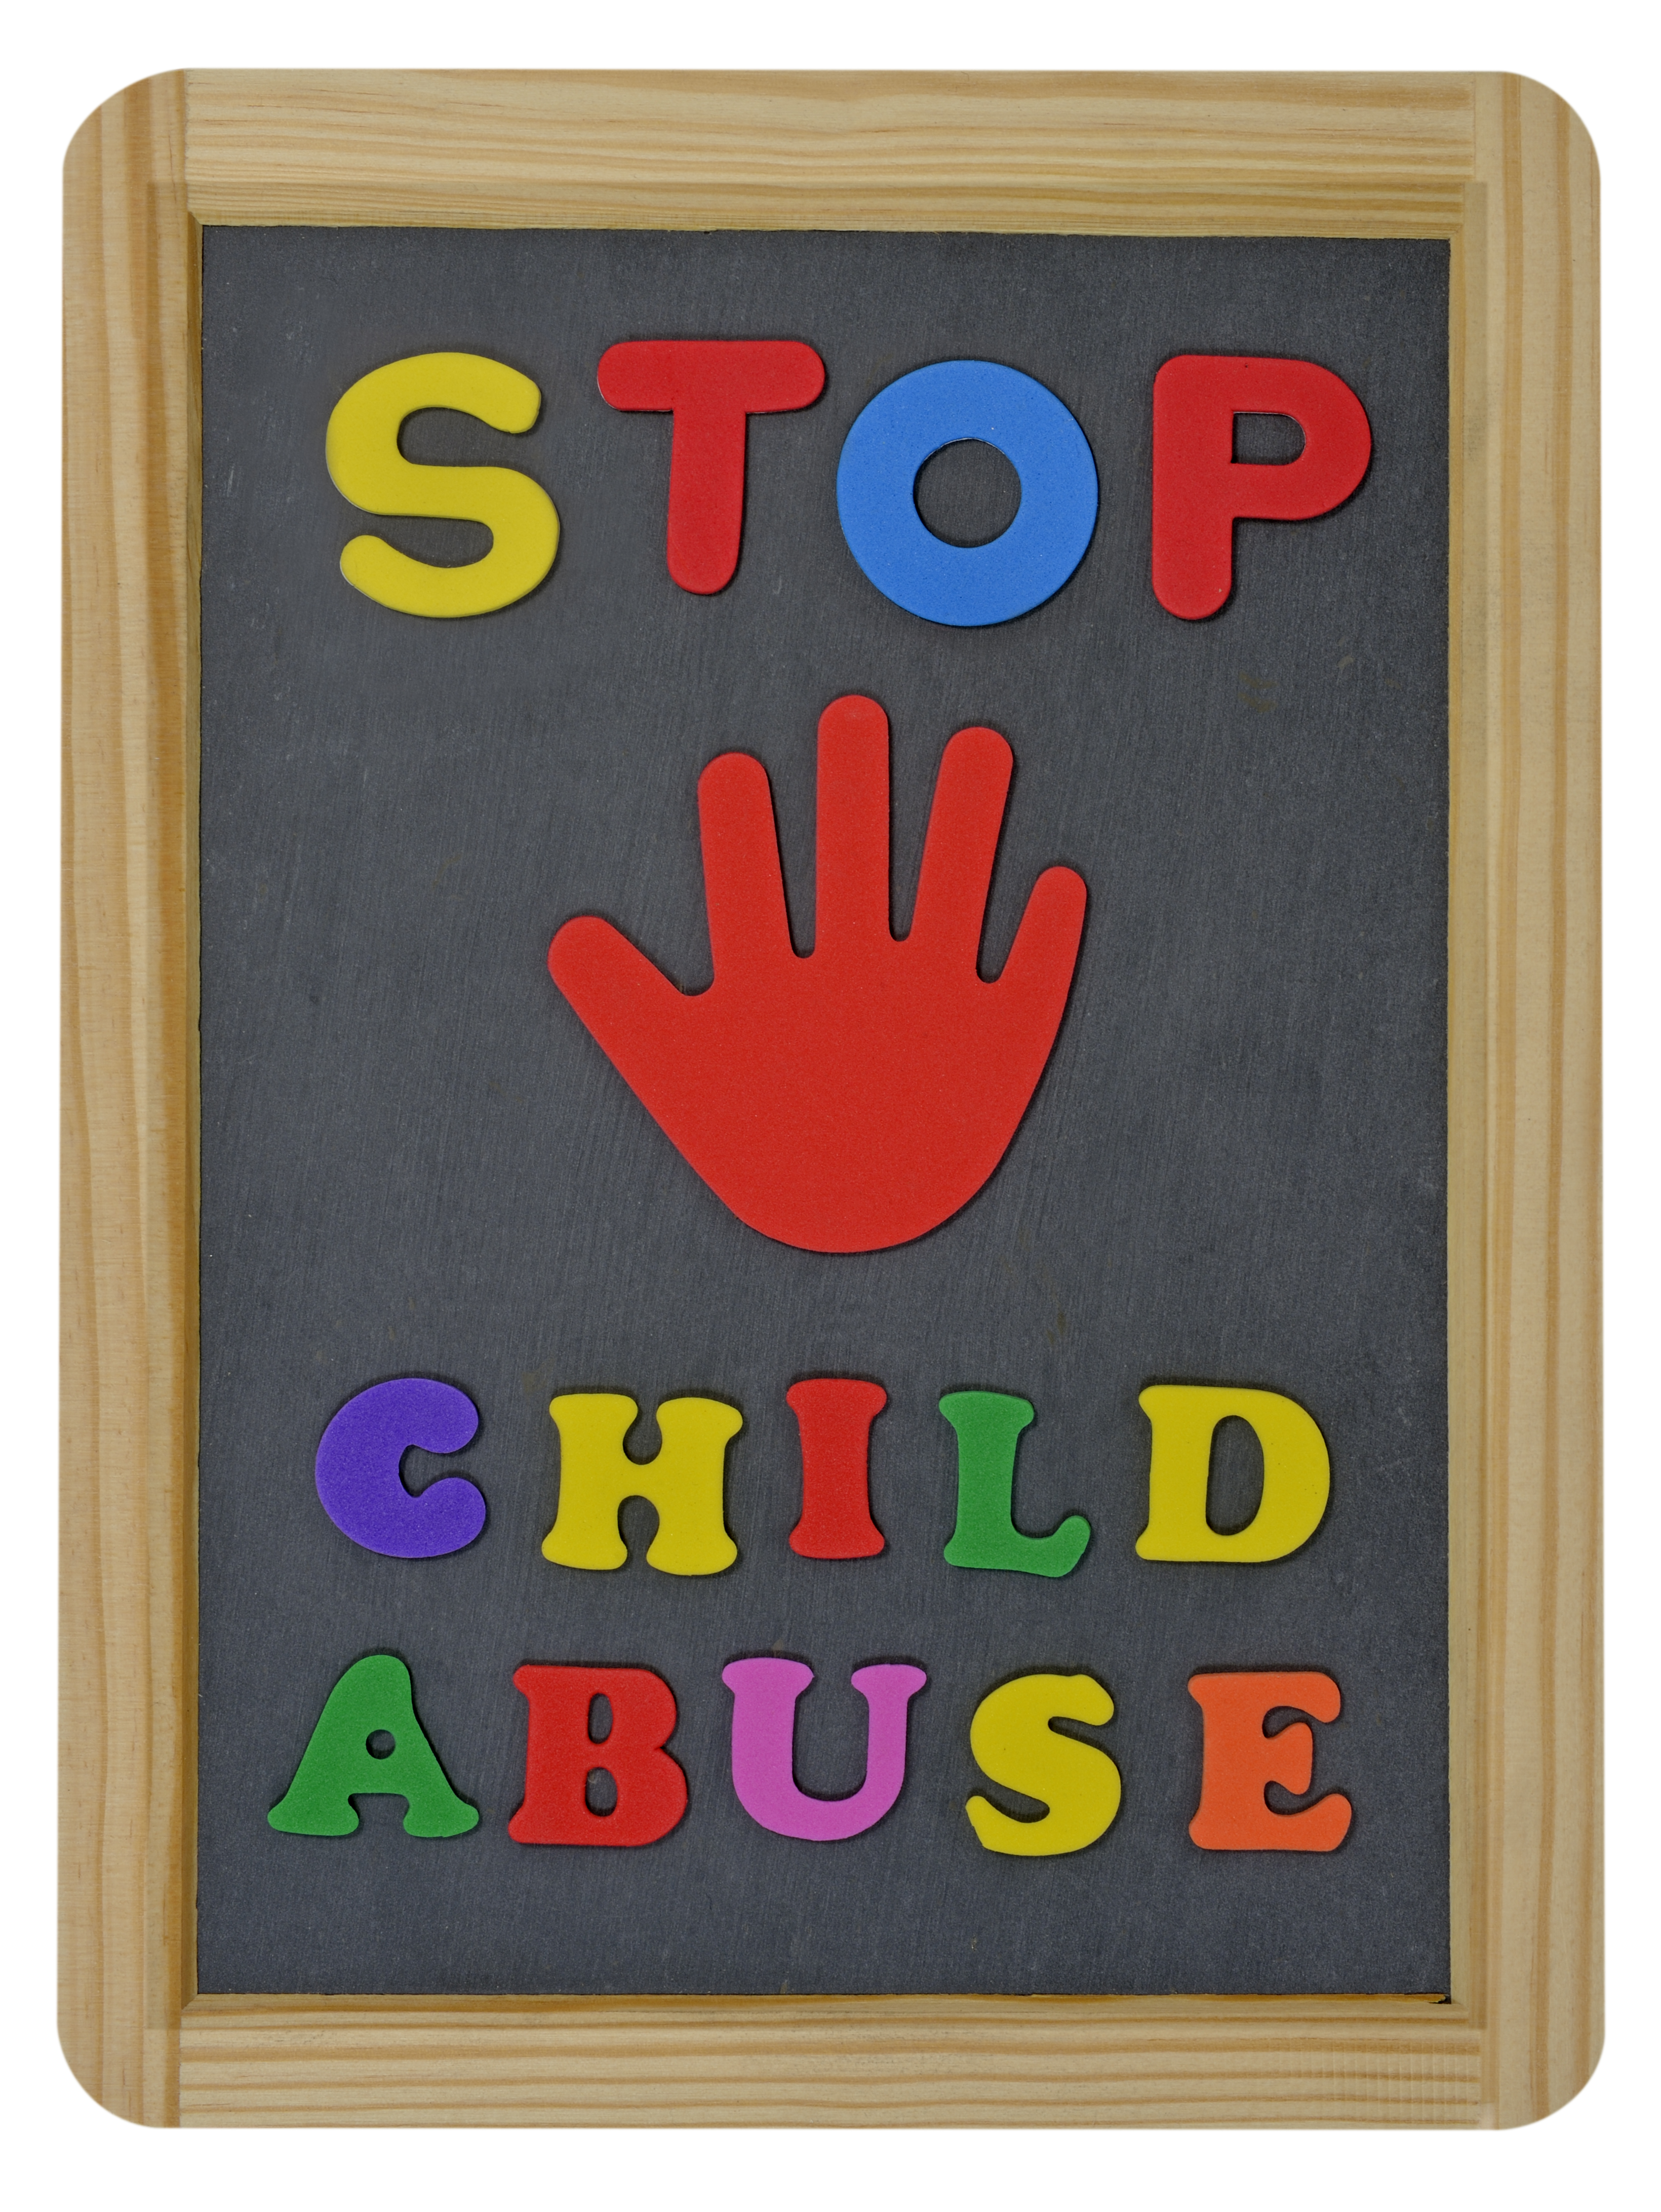 How do you know your organization isn’t at risk of child abuse?